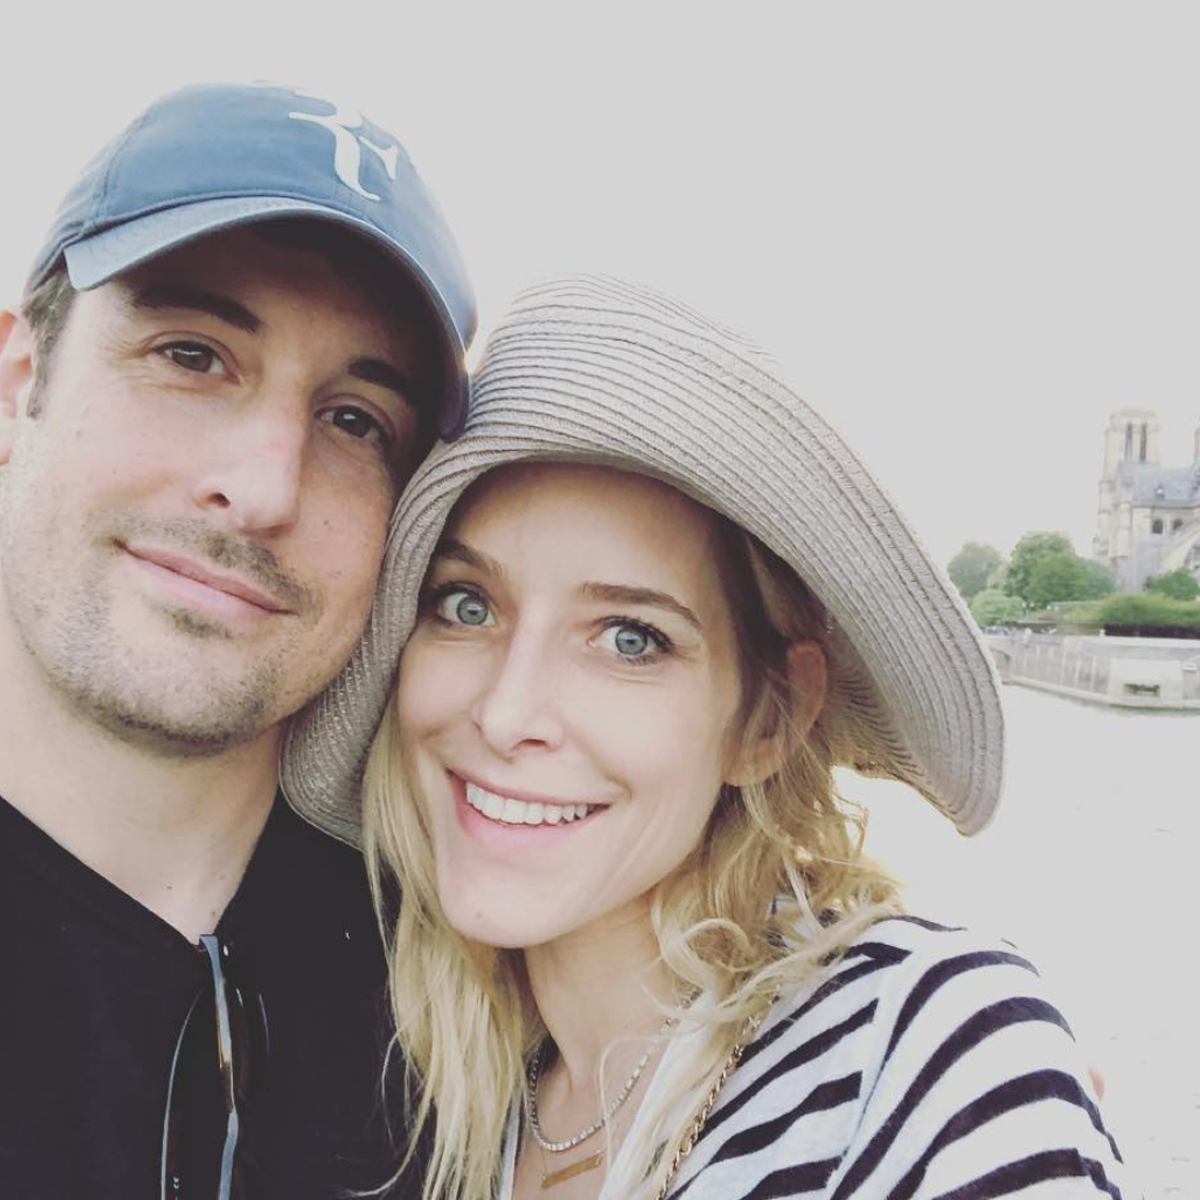 Amazing Amateur Teen Threesome - Photos from Jason Biggs and Jenny Mollen's Cutest Couple Moments - E! Online